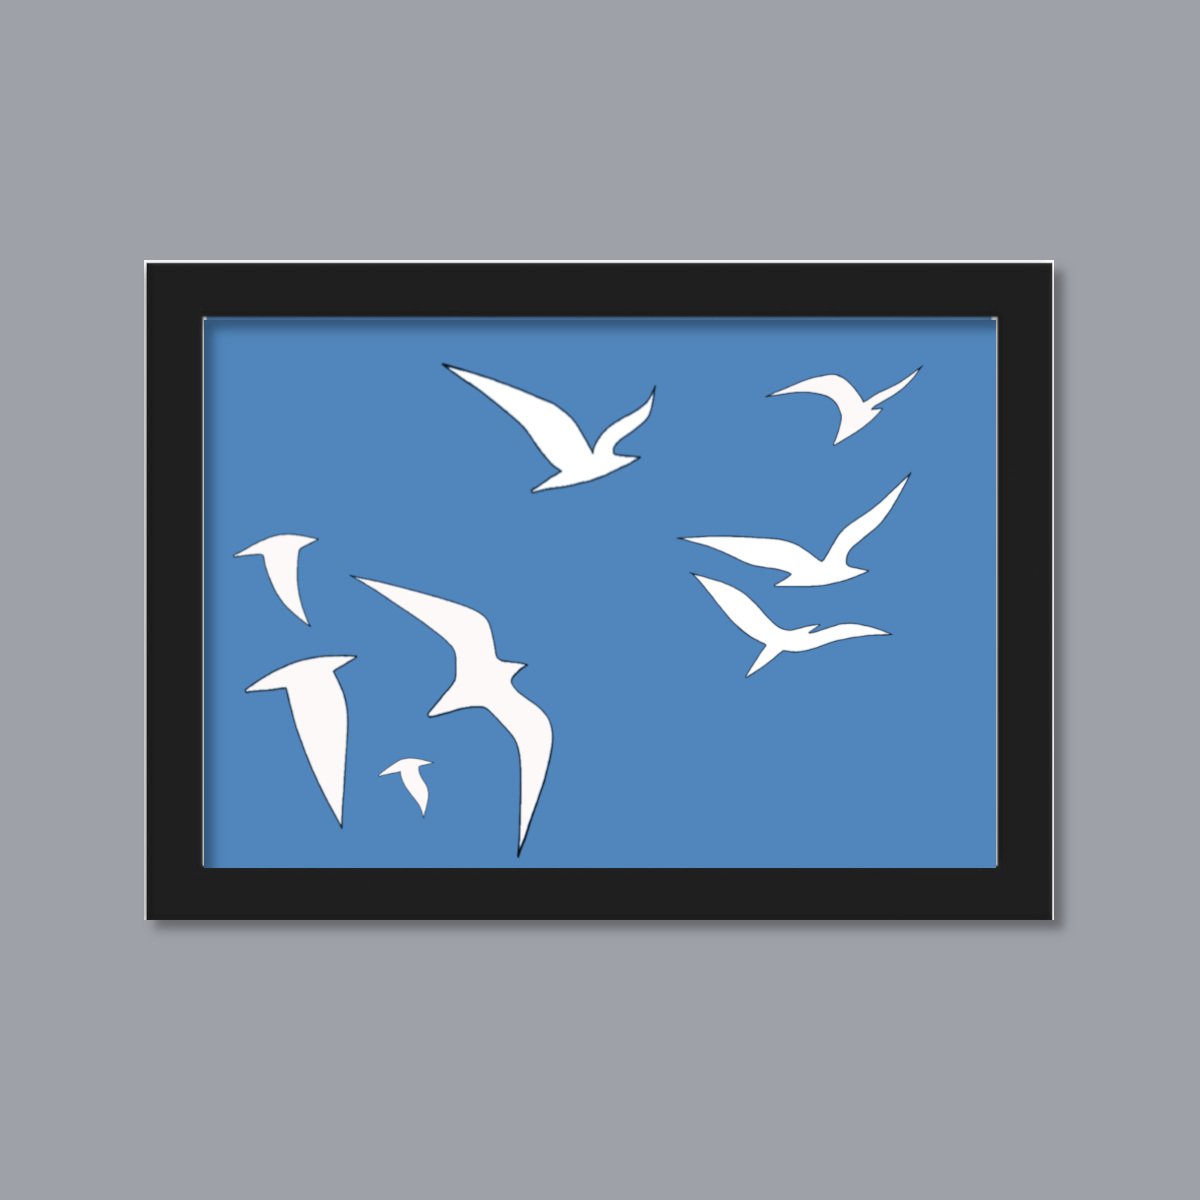 In the Sky #44 - Enhanced Matte Paper Framed Print - Ready to Hang by Marina Krylova